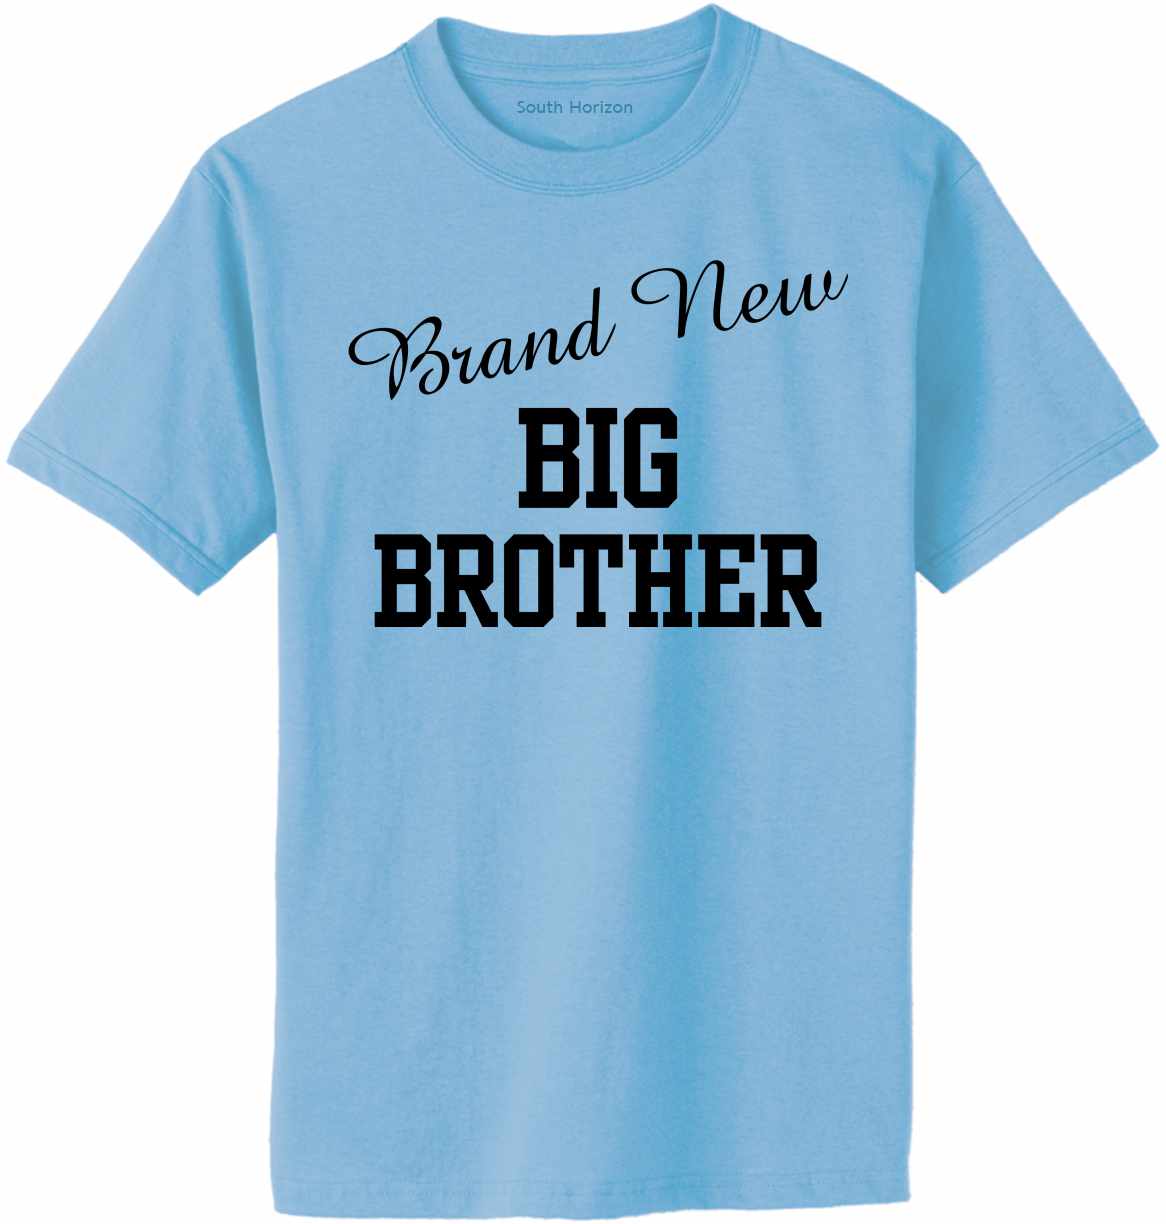 Brand New Big Brother Adult T-Shirt